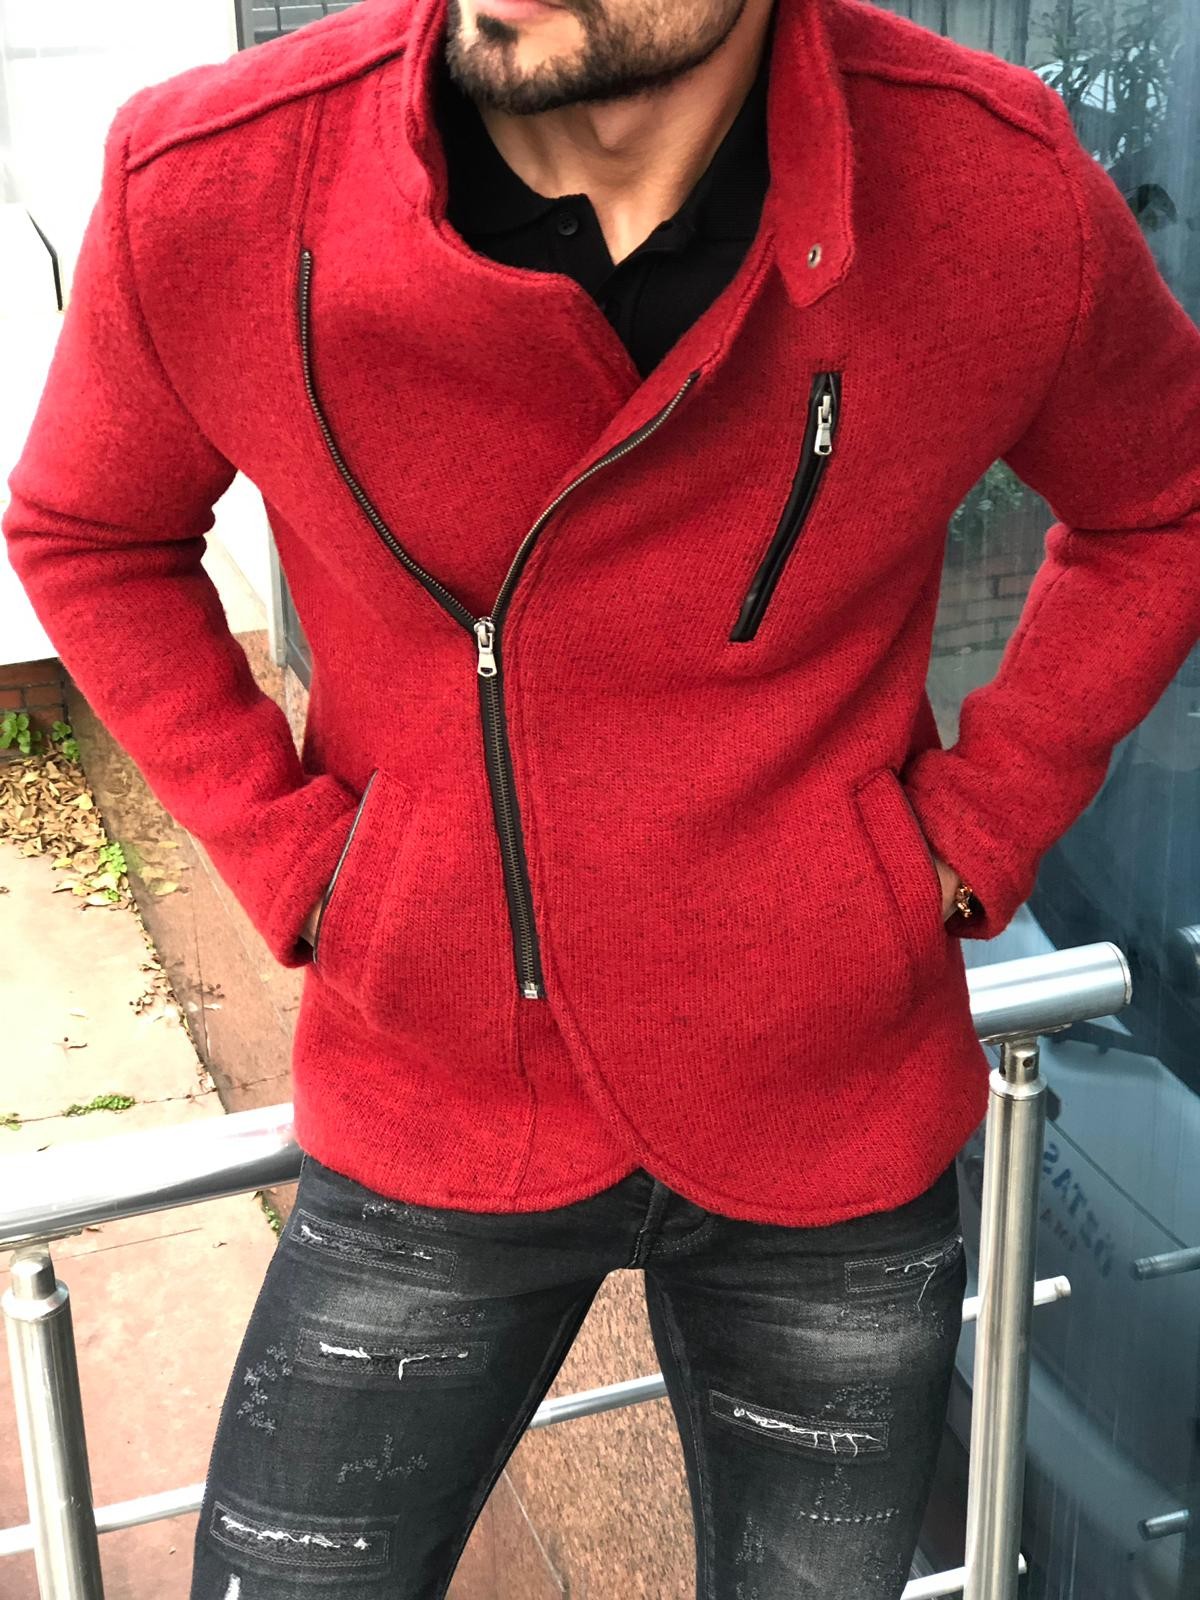 Buy Red Slim Fit Wool Coat by Gentwith.com with Free Shipping